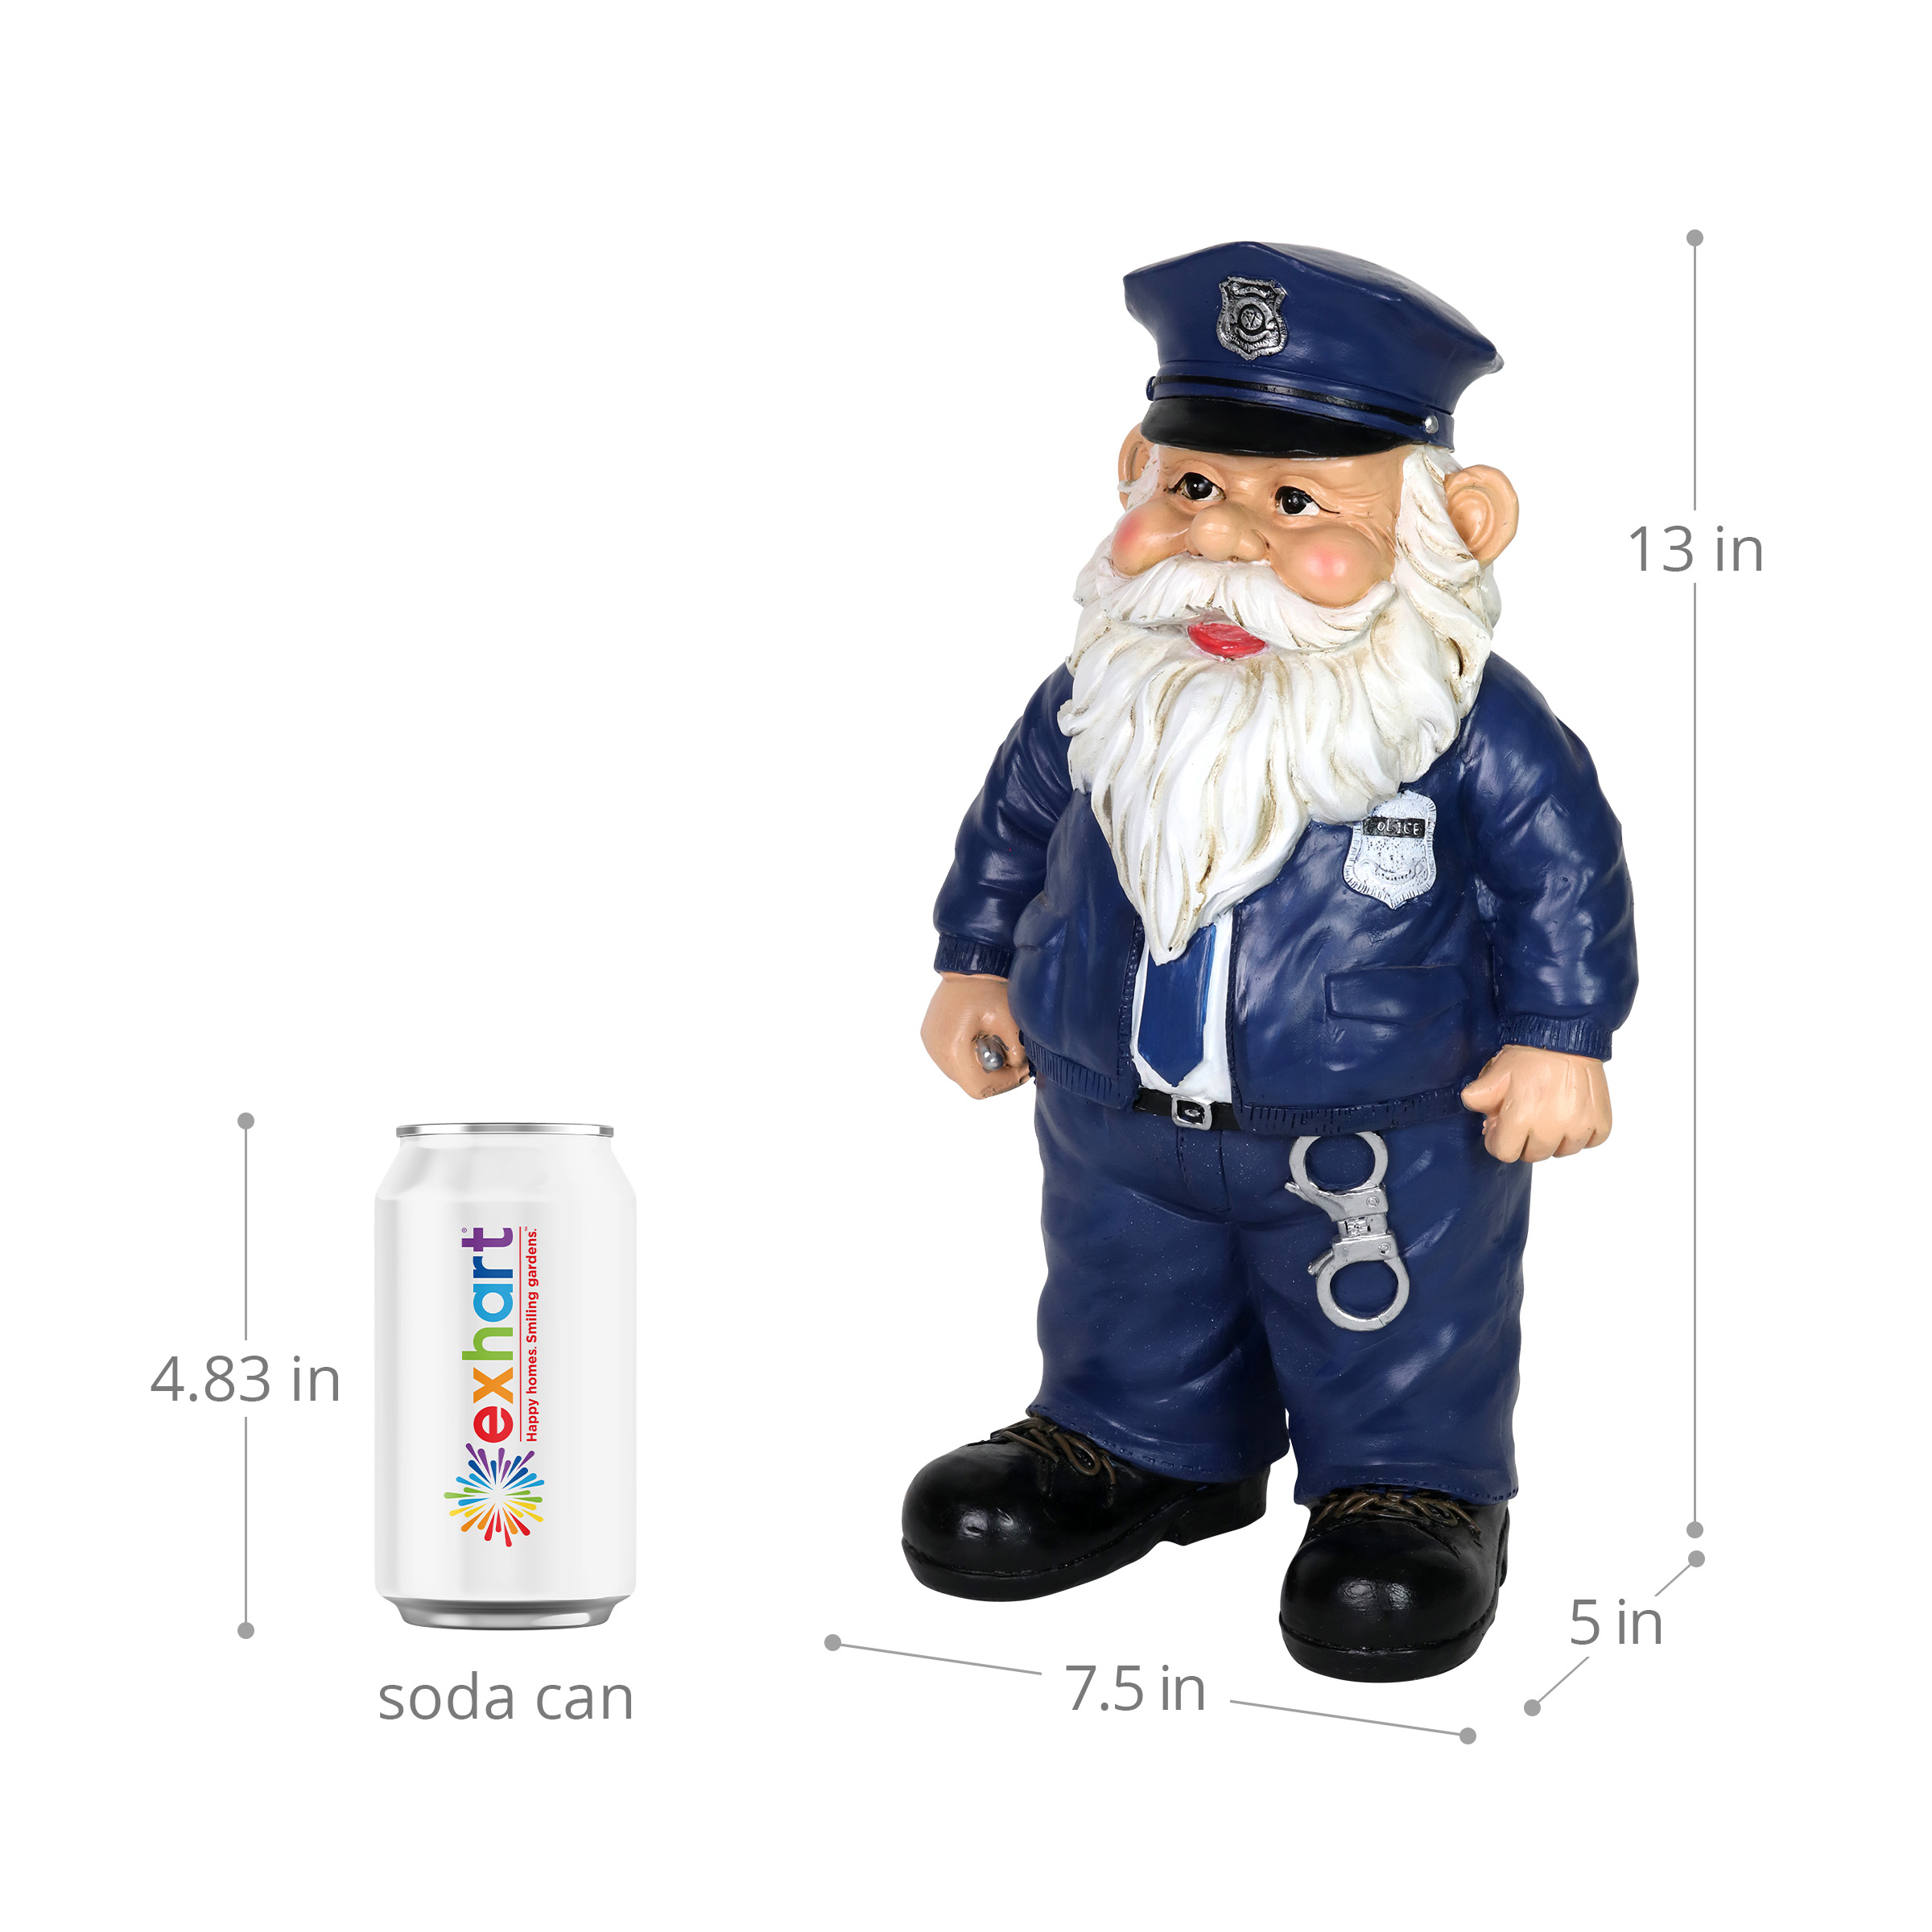 Exhart Policeman Gnome Statuary, 7.5 by 13 inches, Resin, Multicolor - image 4 of 7